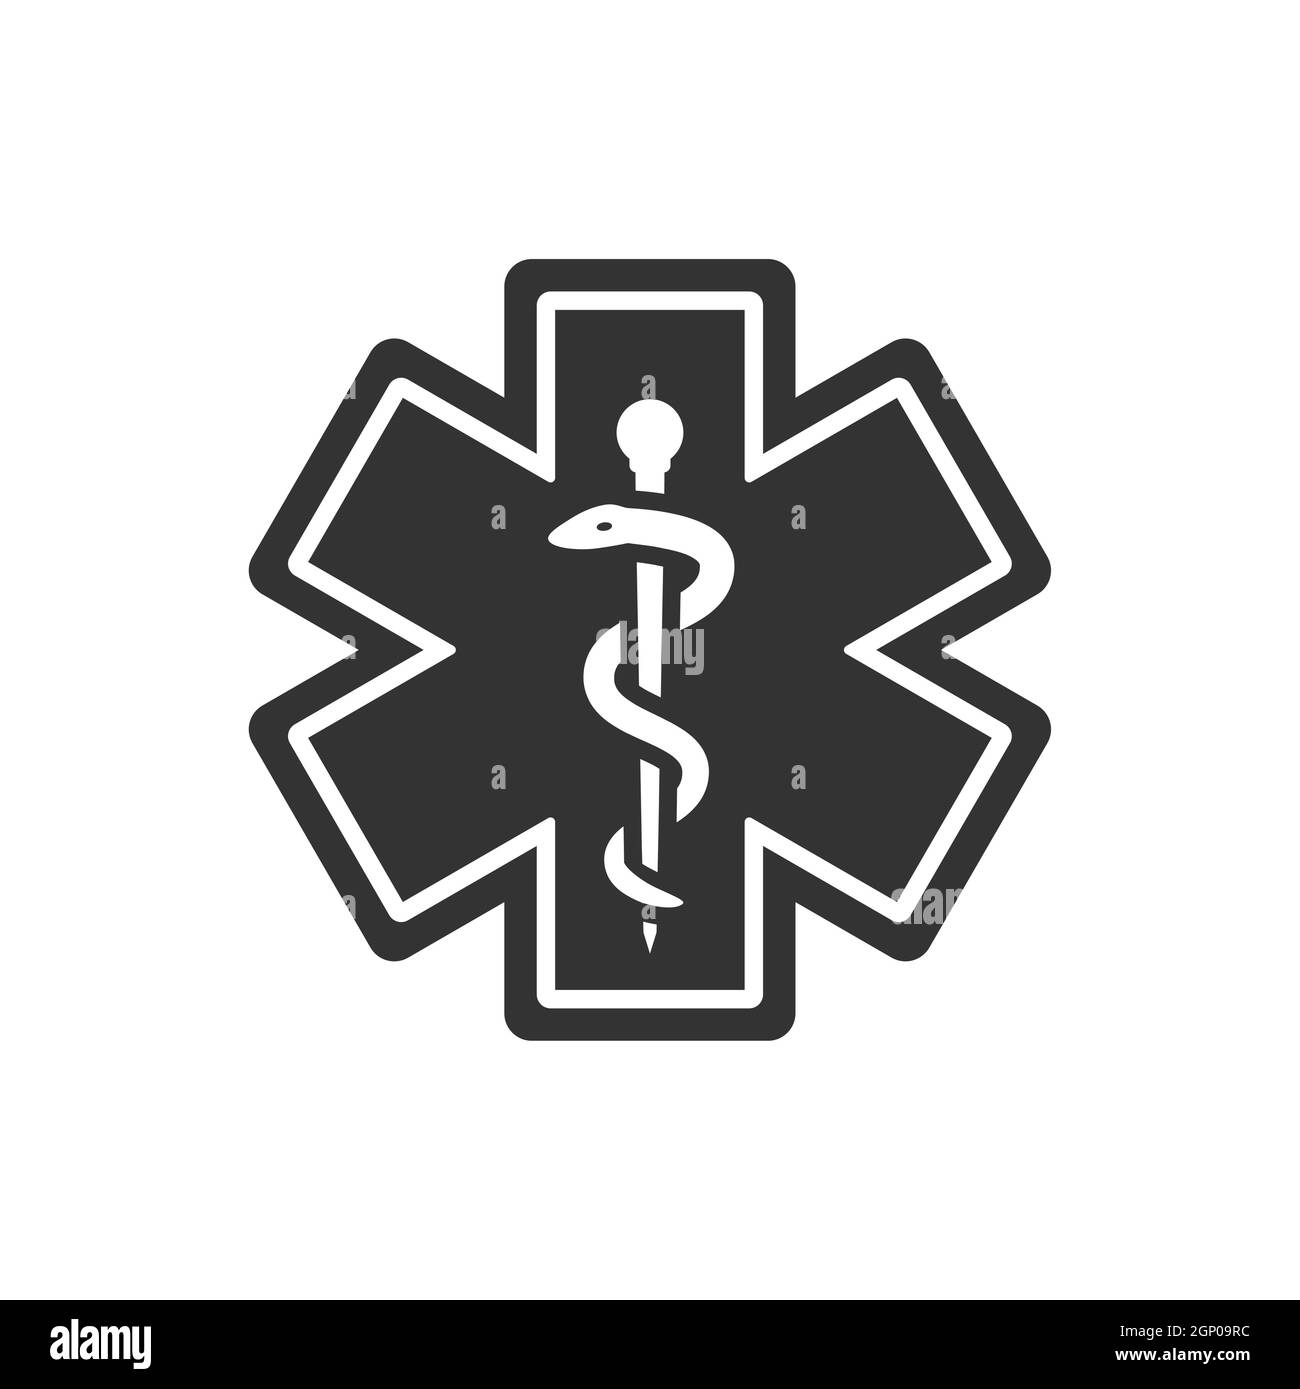 First aid, medical emergency vector symbol Stock Vector